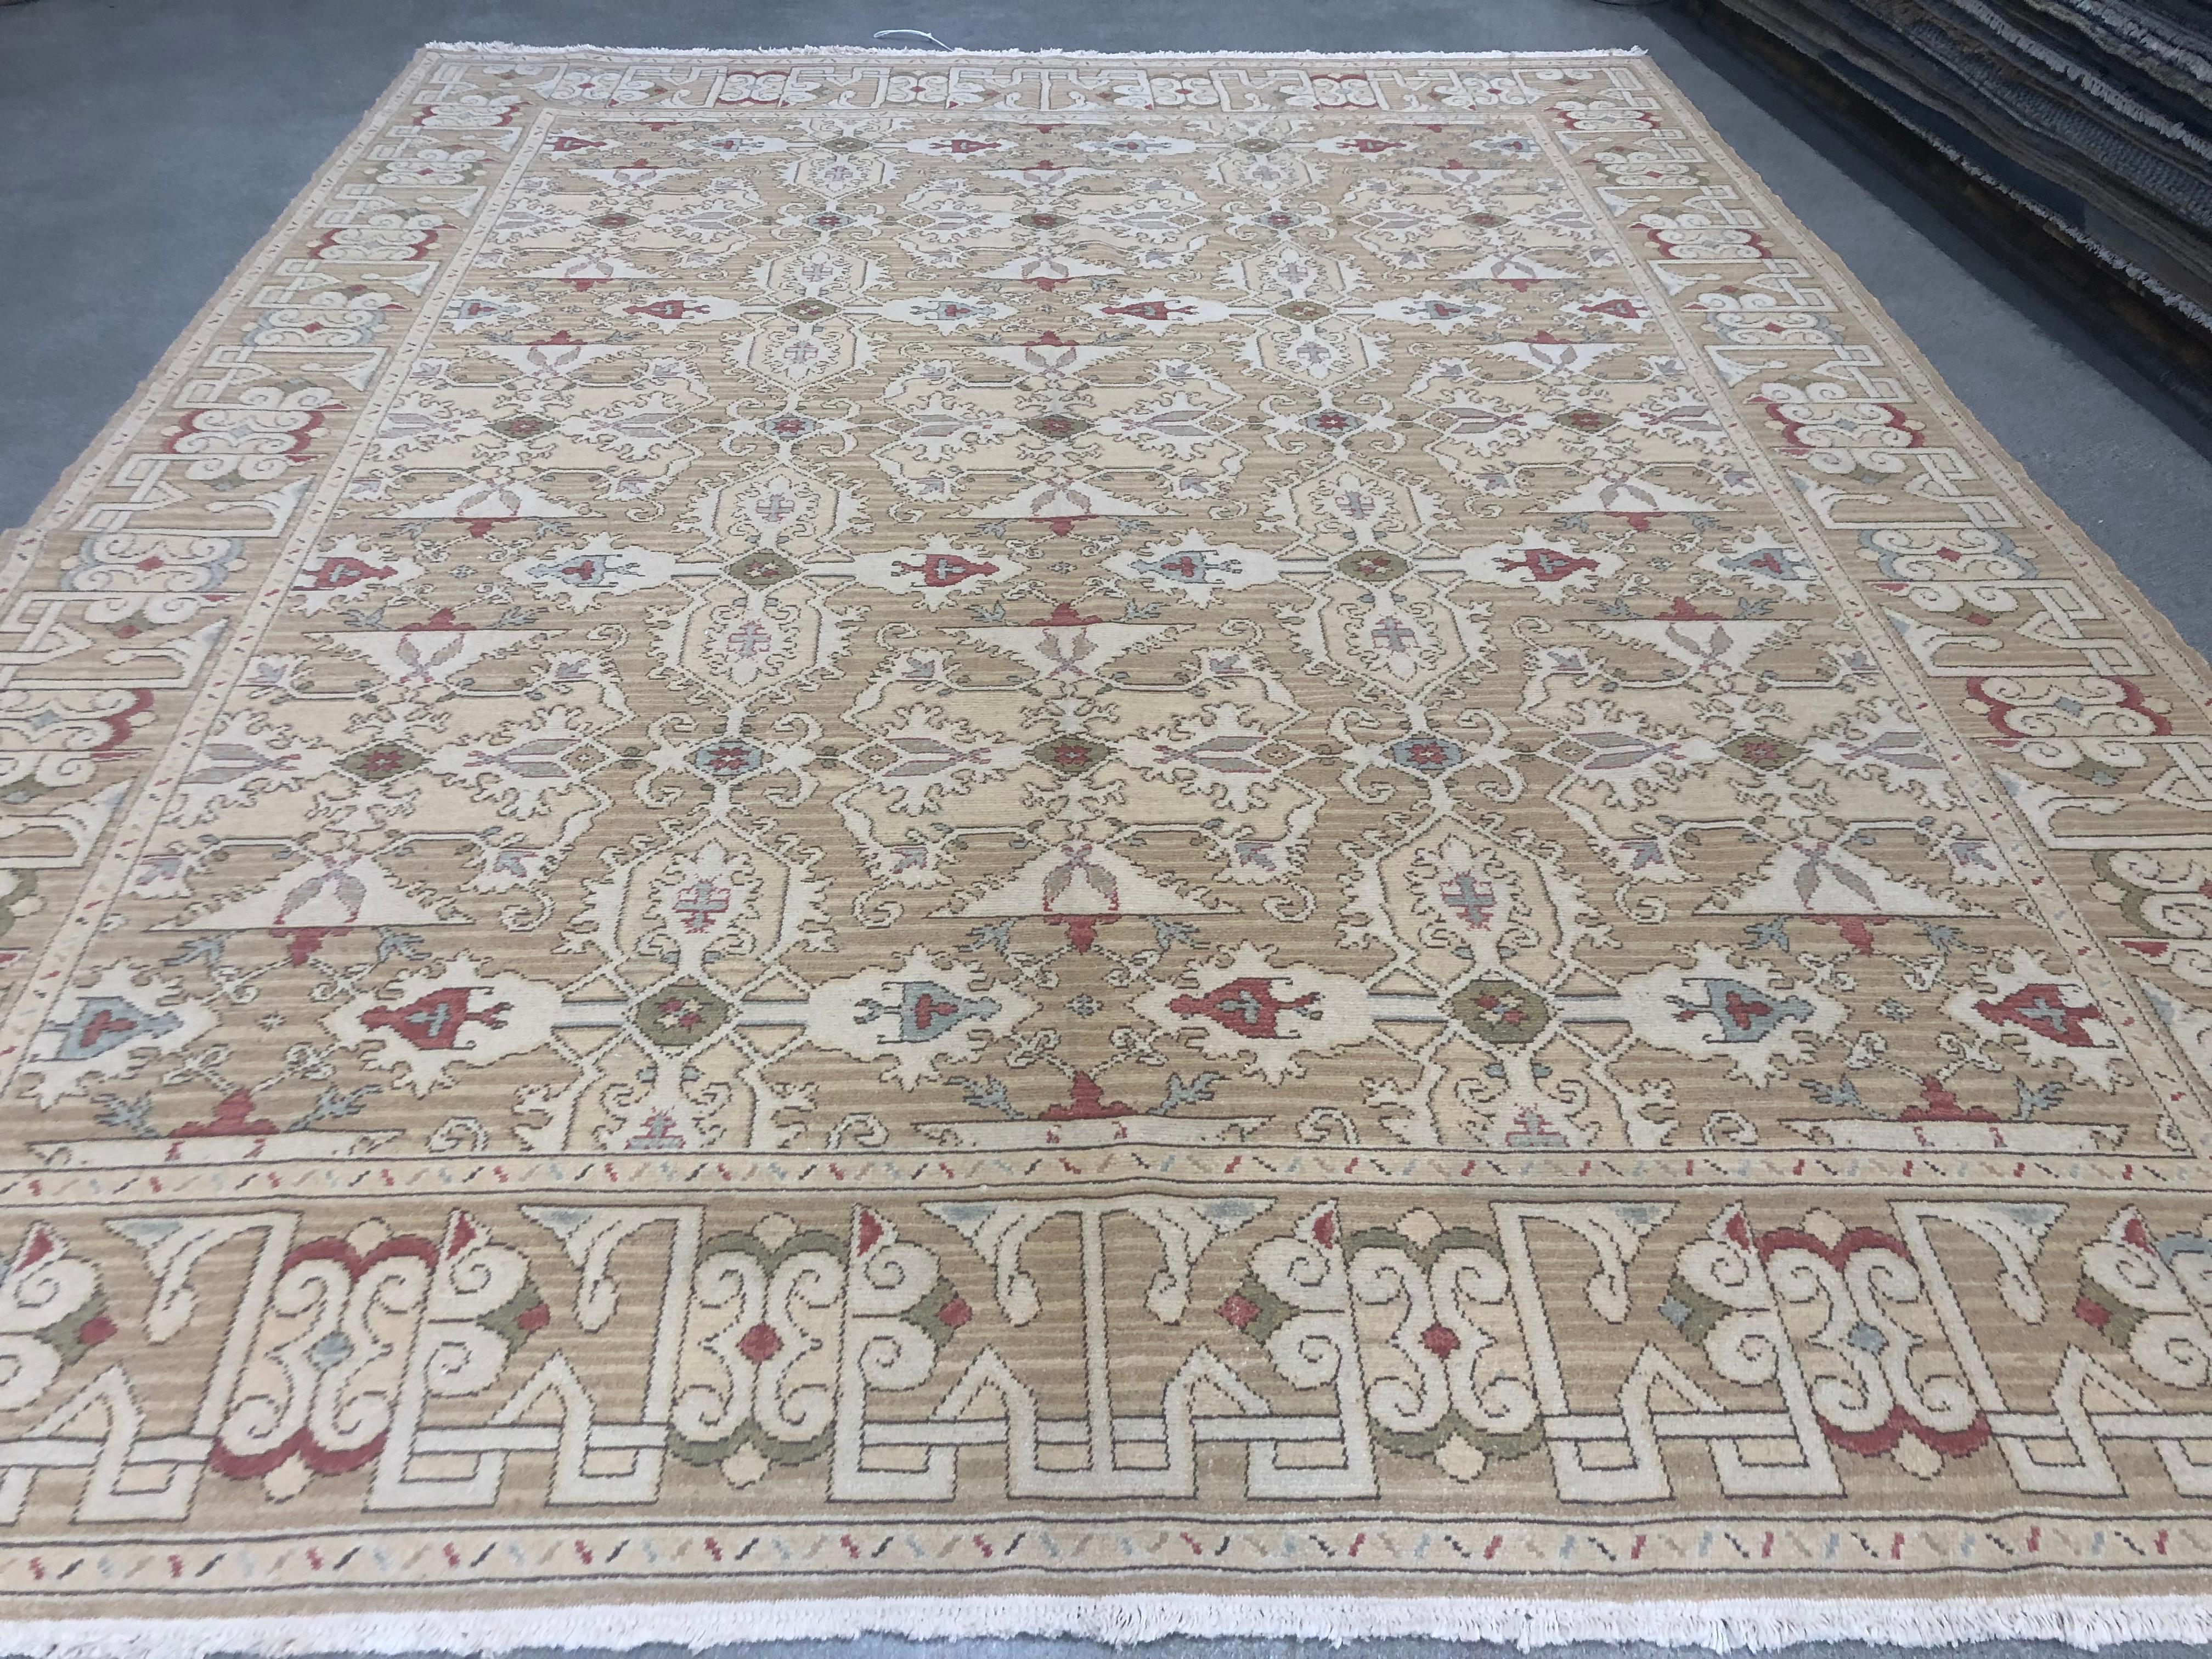 The highly decorative style of this stunning European Design collection rug brings to mind an exquisite Iberian tiled floor. Shades of gold, red, blue and ivory against a tan background are featured in both the large center panel and contrasting